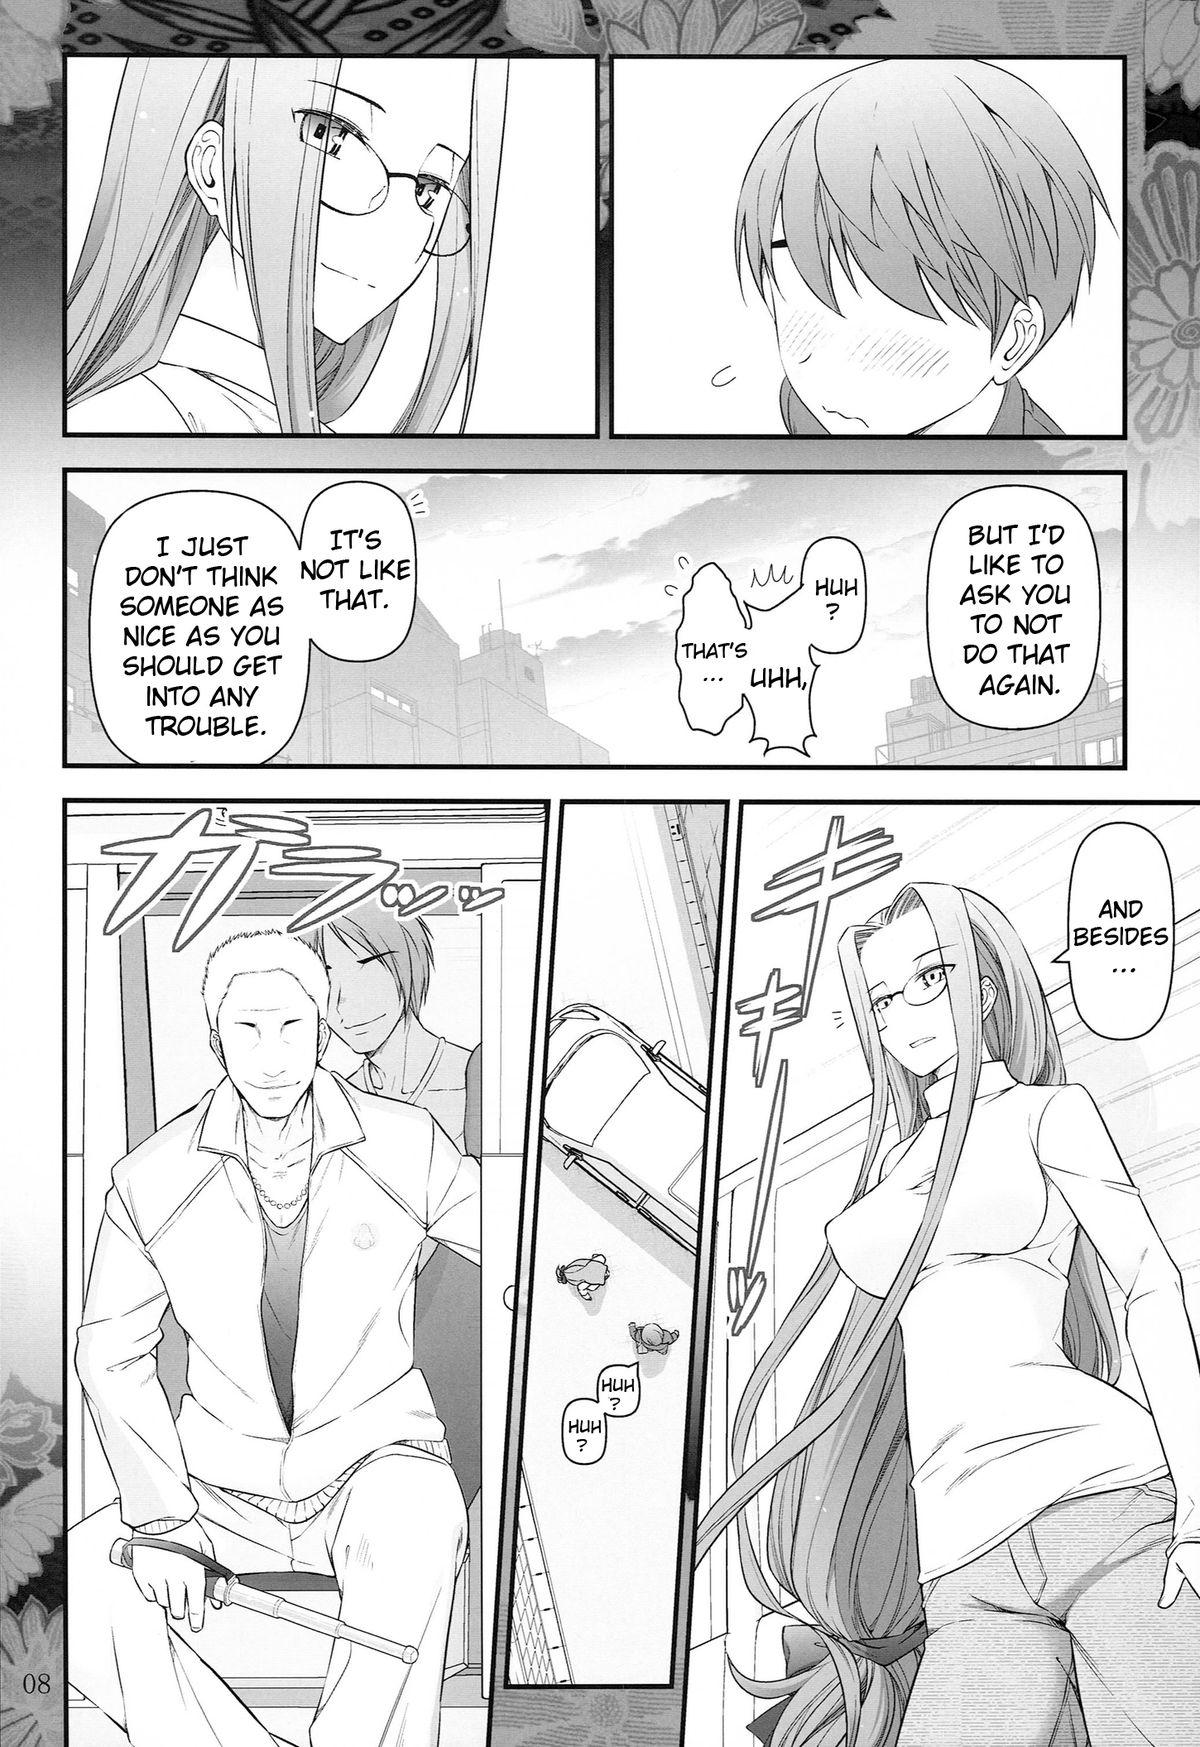 Vintage Fate/stay night Rider-san to Shounen no Nichijou | Fate/Stay Night Rider and Shounen's Daily Affection - Fate stay night Role Play - Page 9